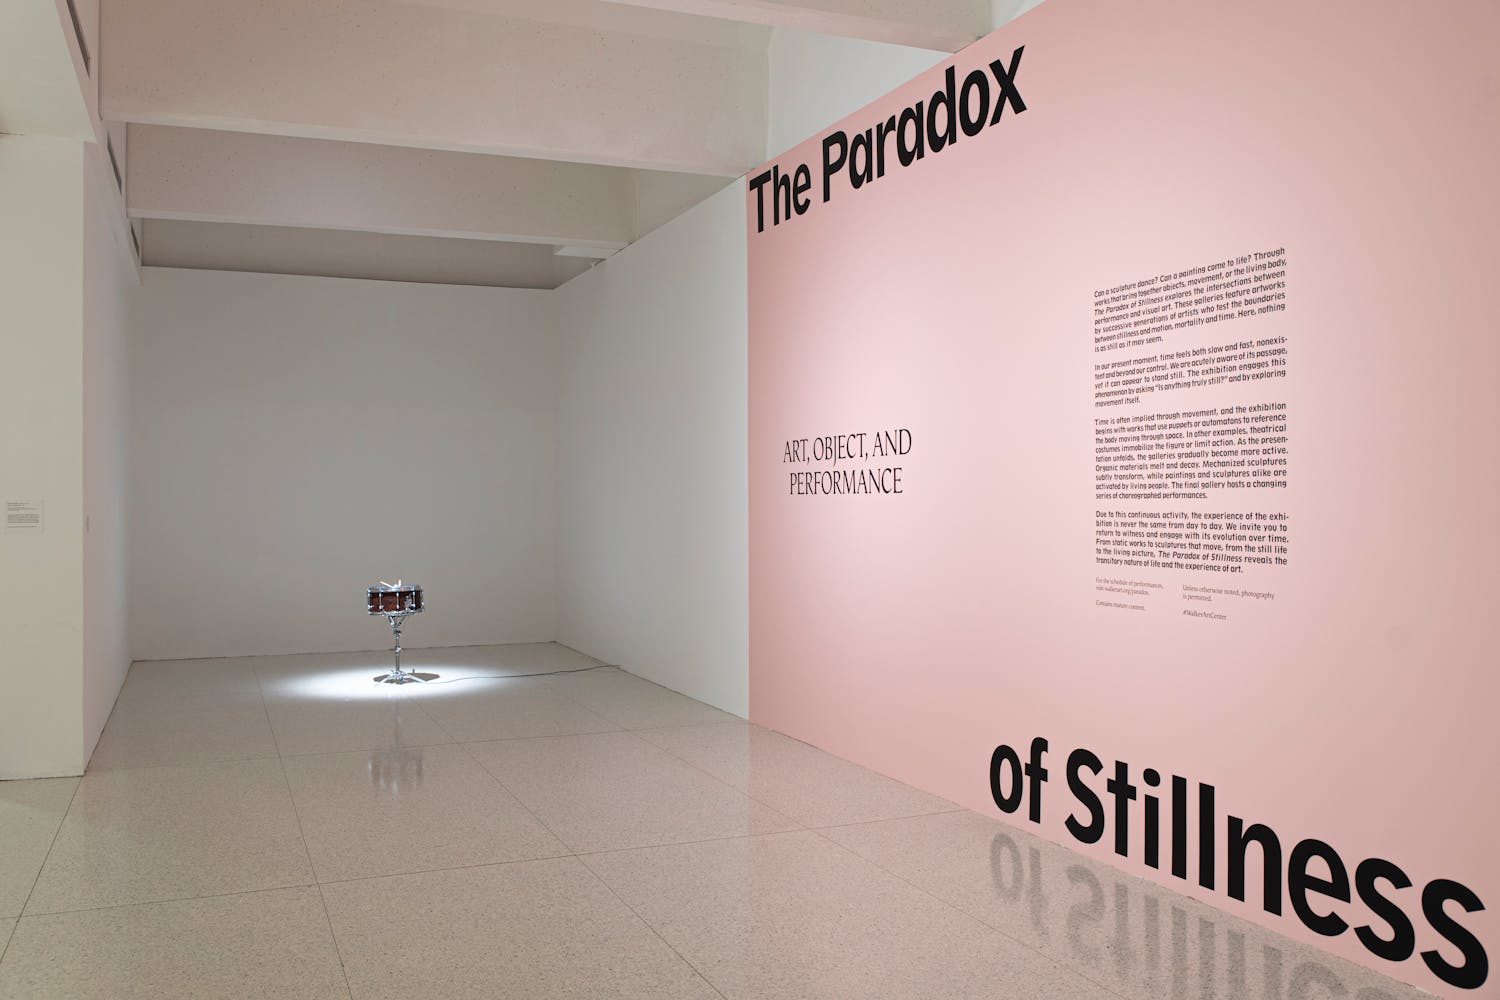 Image of pink gallery title wall with the words "The Paradox of Stillnes" and small snare drum in spotlight